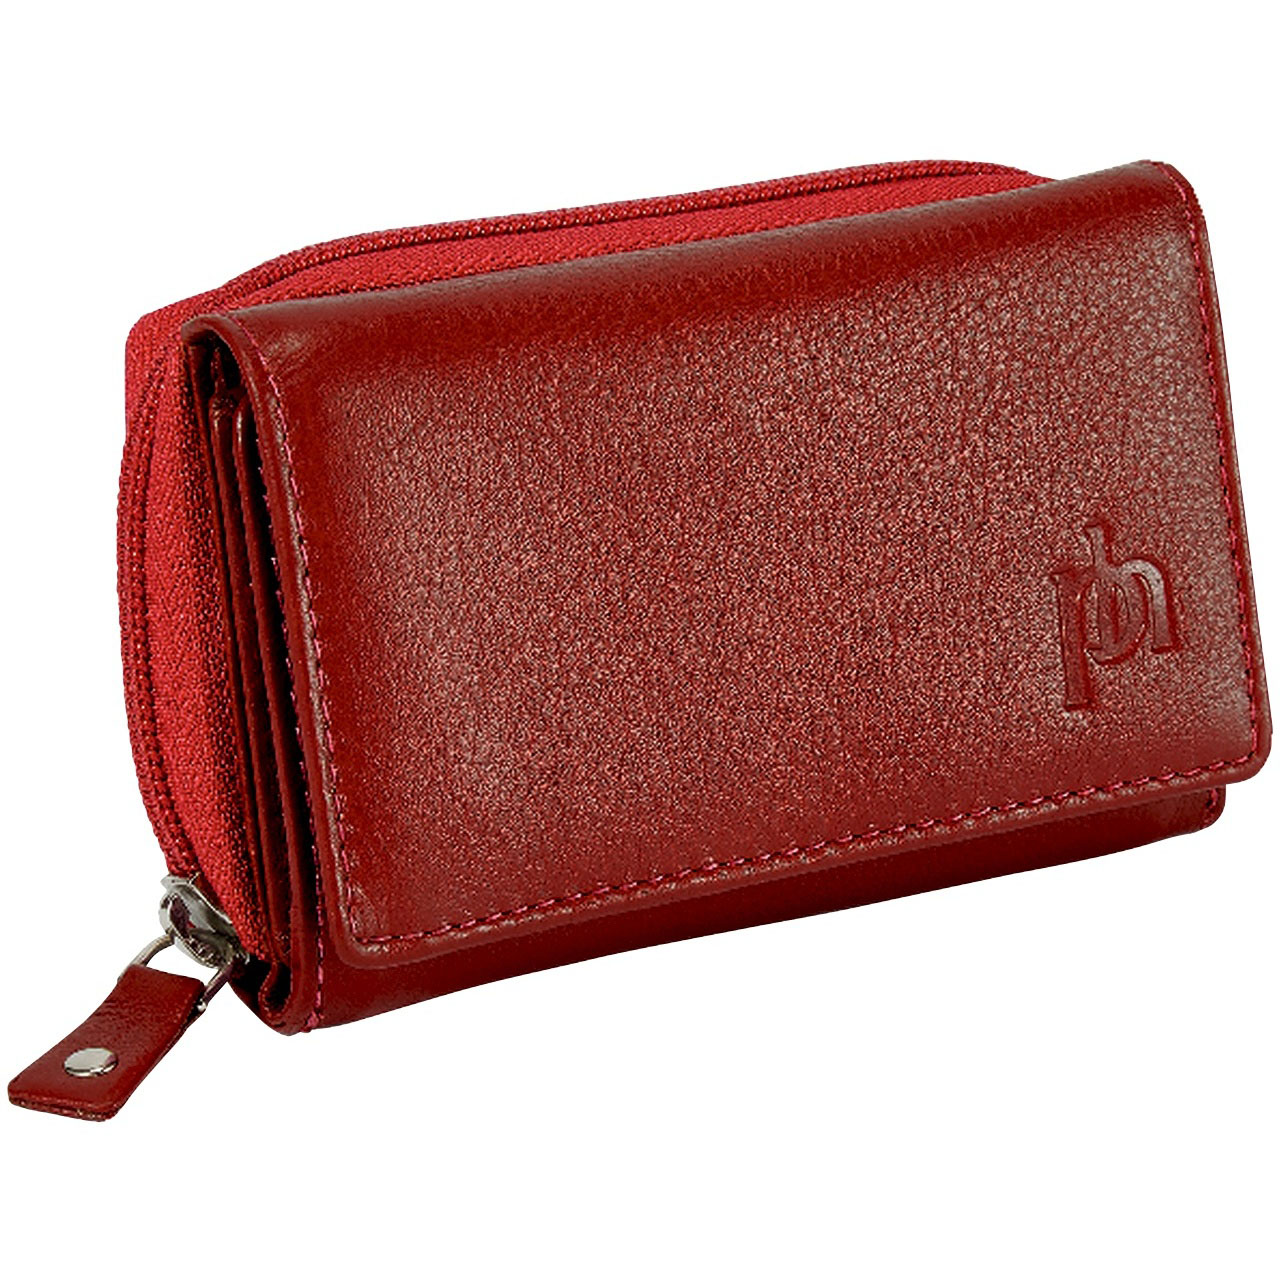 Cockapoo Coin Purse - Red | The Hector Company